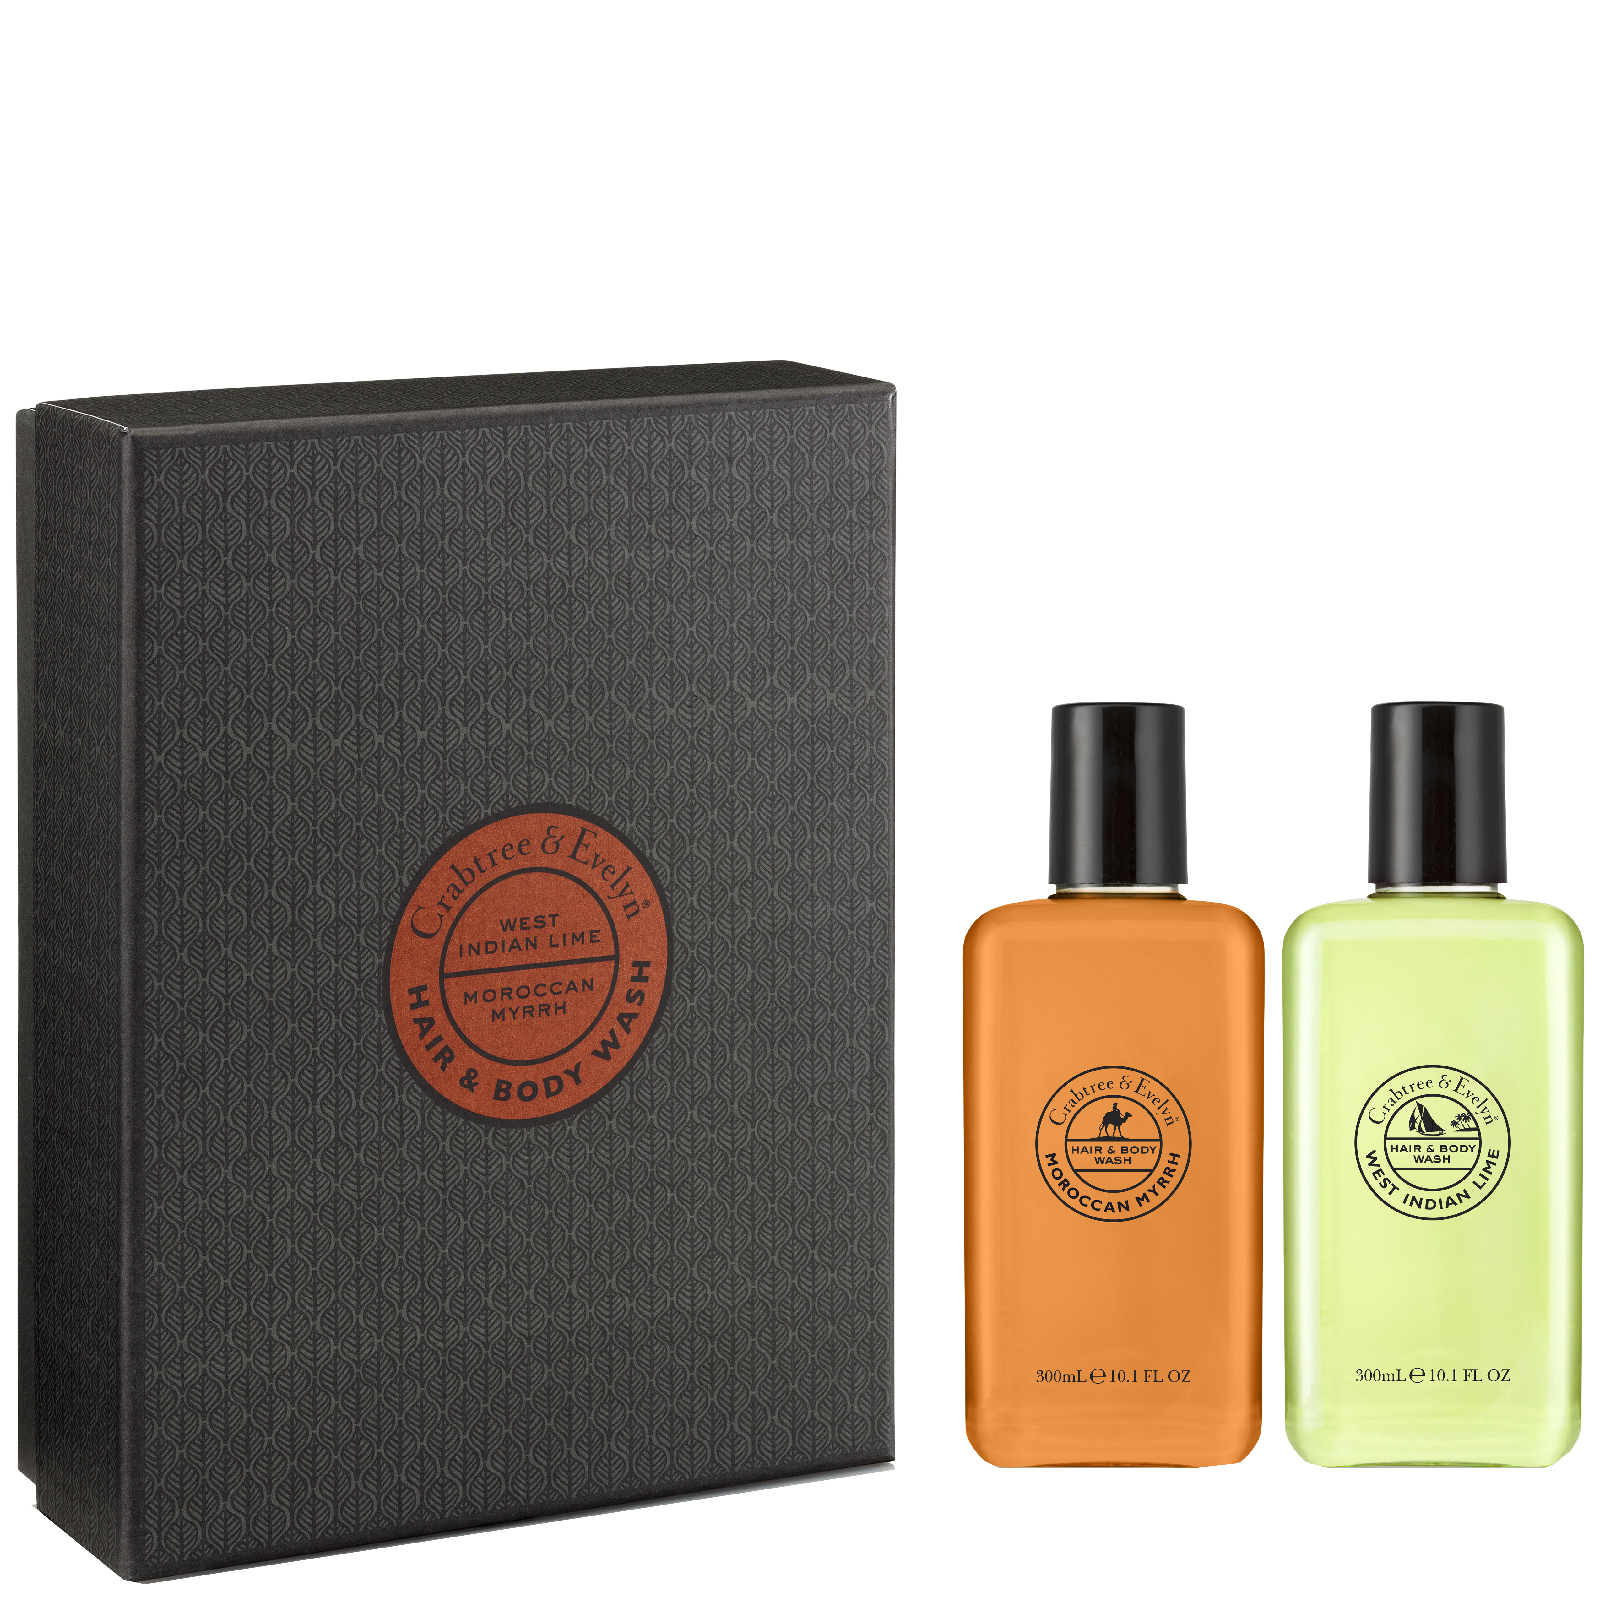 Crabtree & Evelyn Men's Hair & Body Wash Duo